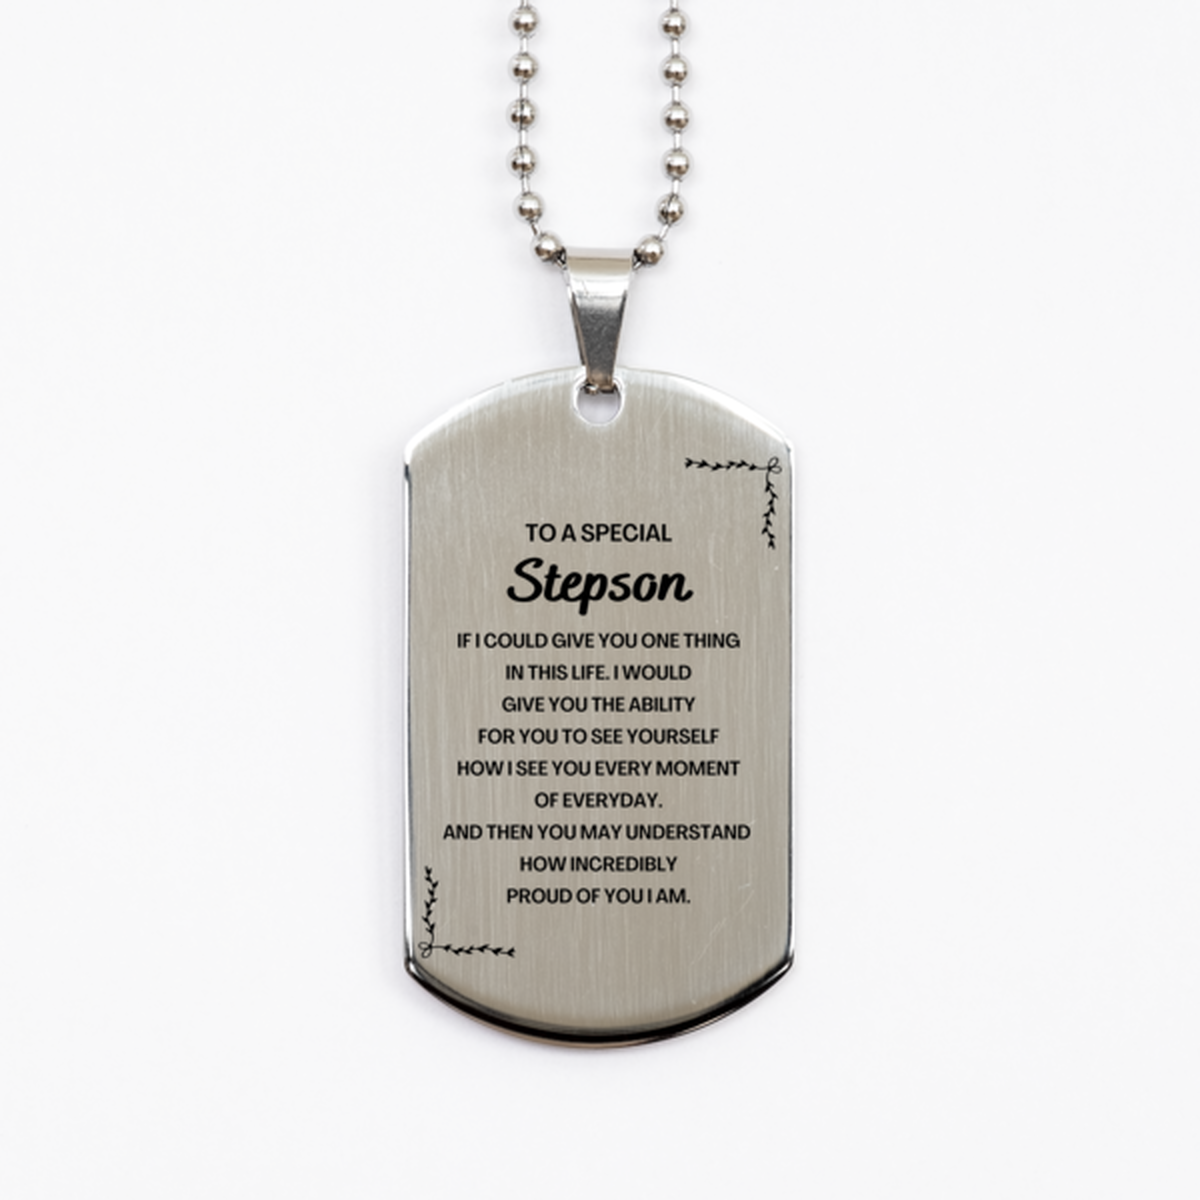 To My Stepson Silver Dog Tag, Gifts For Stepson Engraved, Inspirational Gifts for Christmas Birthday, Epic Gifts for Stepson To A Special Stepson how incredibly proud of you I am